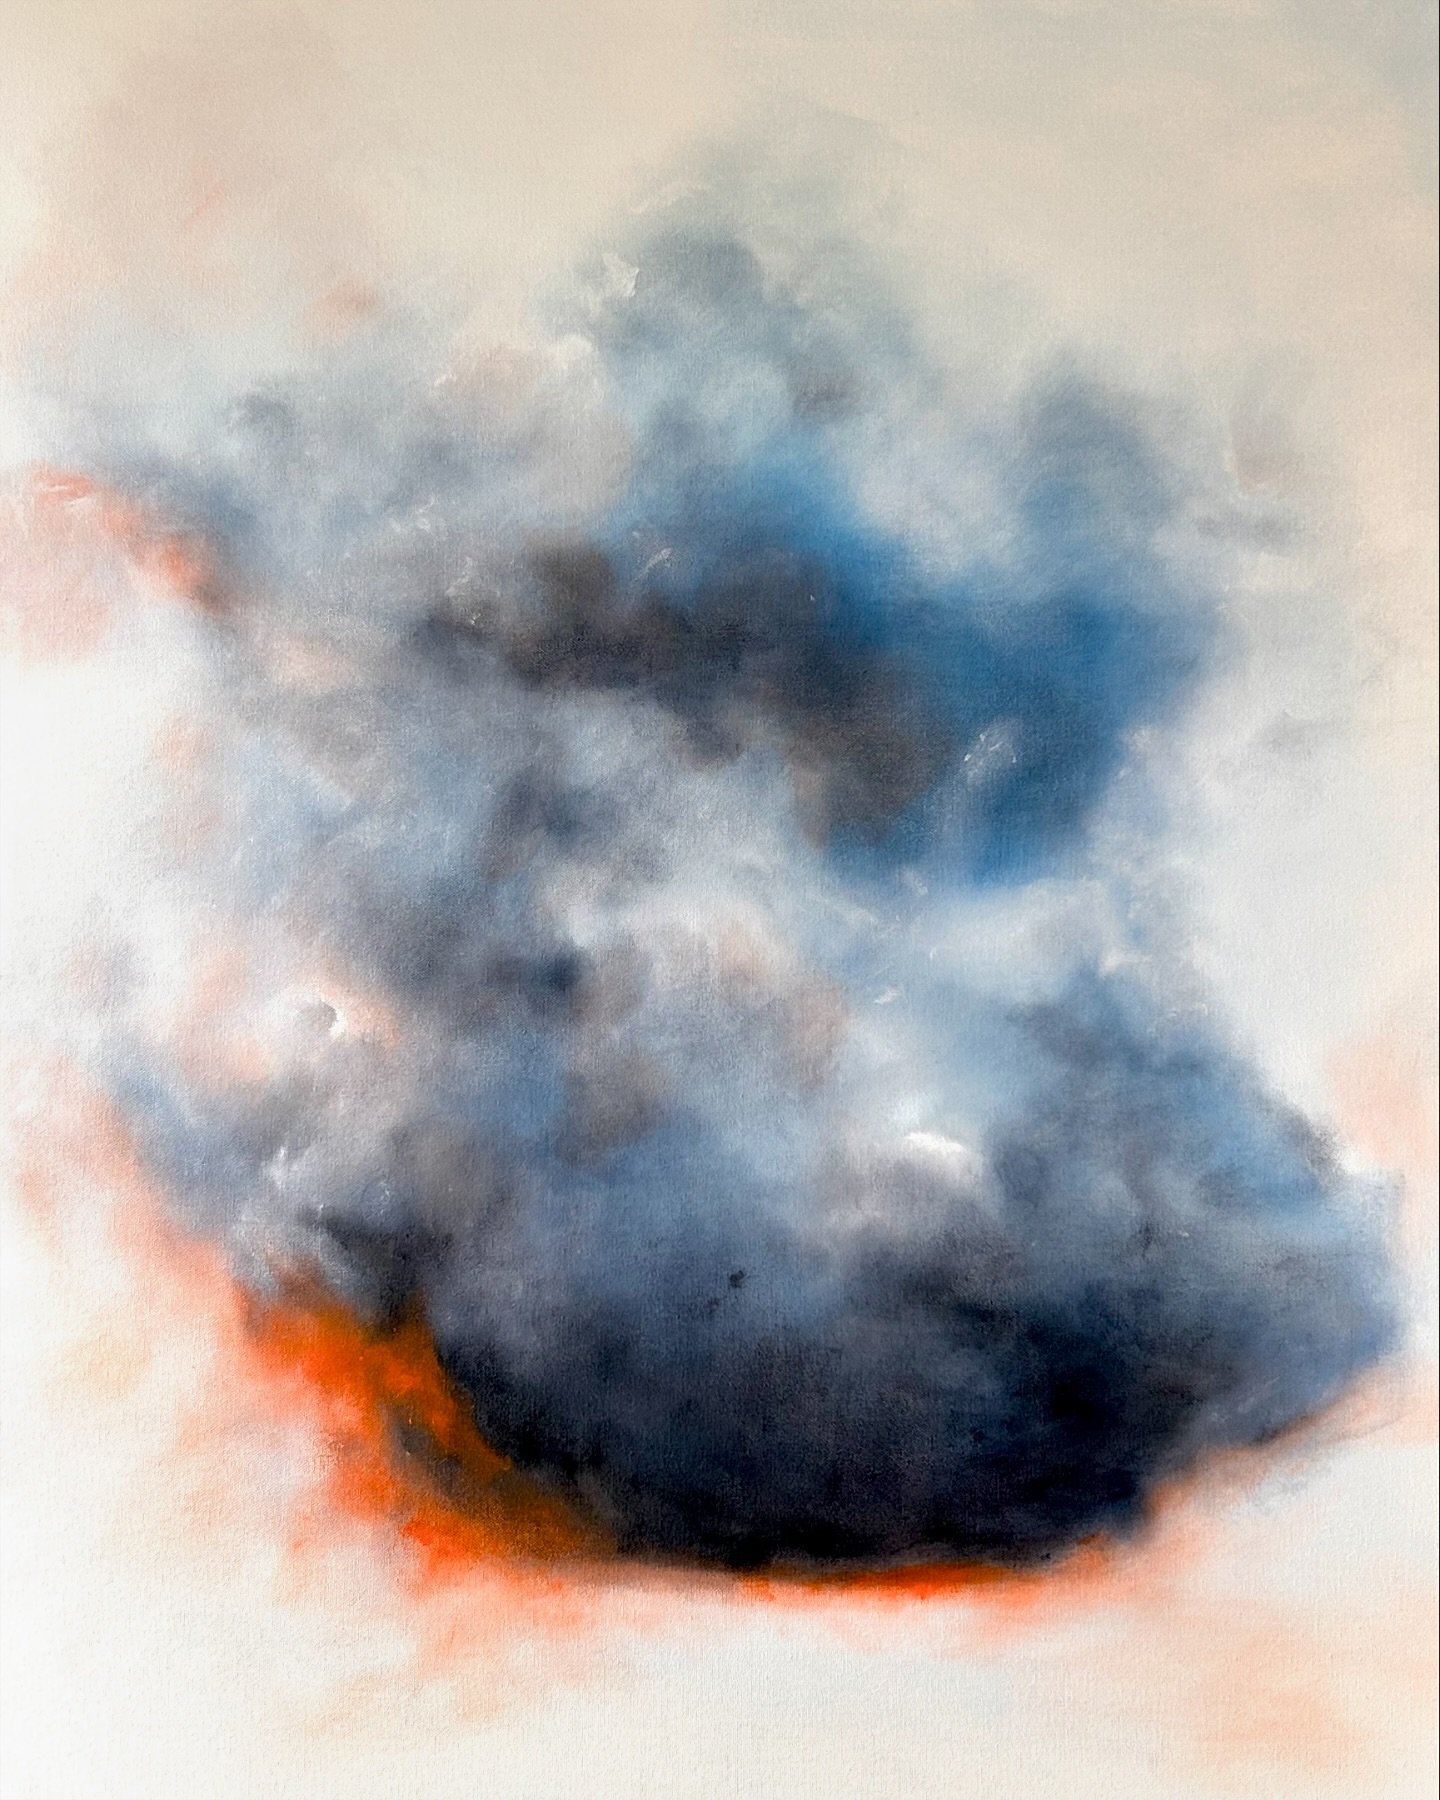 Work in progress of a new series that i&rsquo;m slowly working on &hellip; the spaces between; clouds and the use of negative spaces to give a balance and calmness within ourselves.
This one has been quite slow going whilst it gets its sense of depth